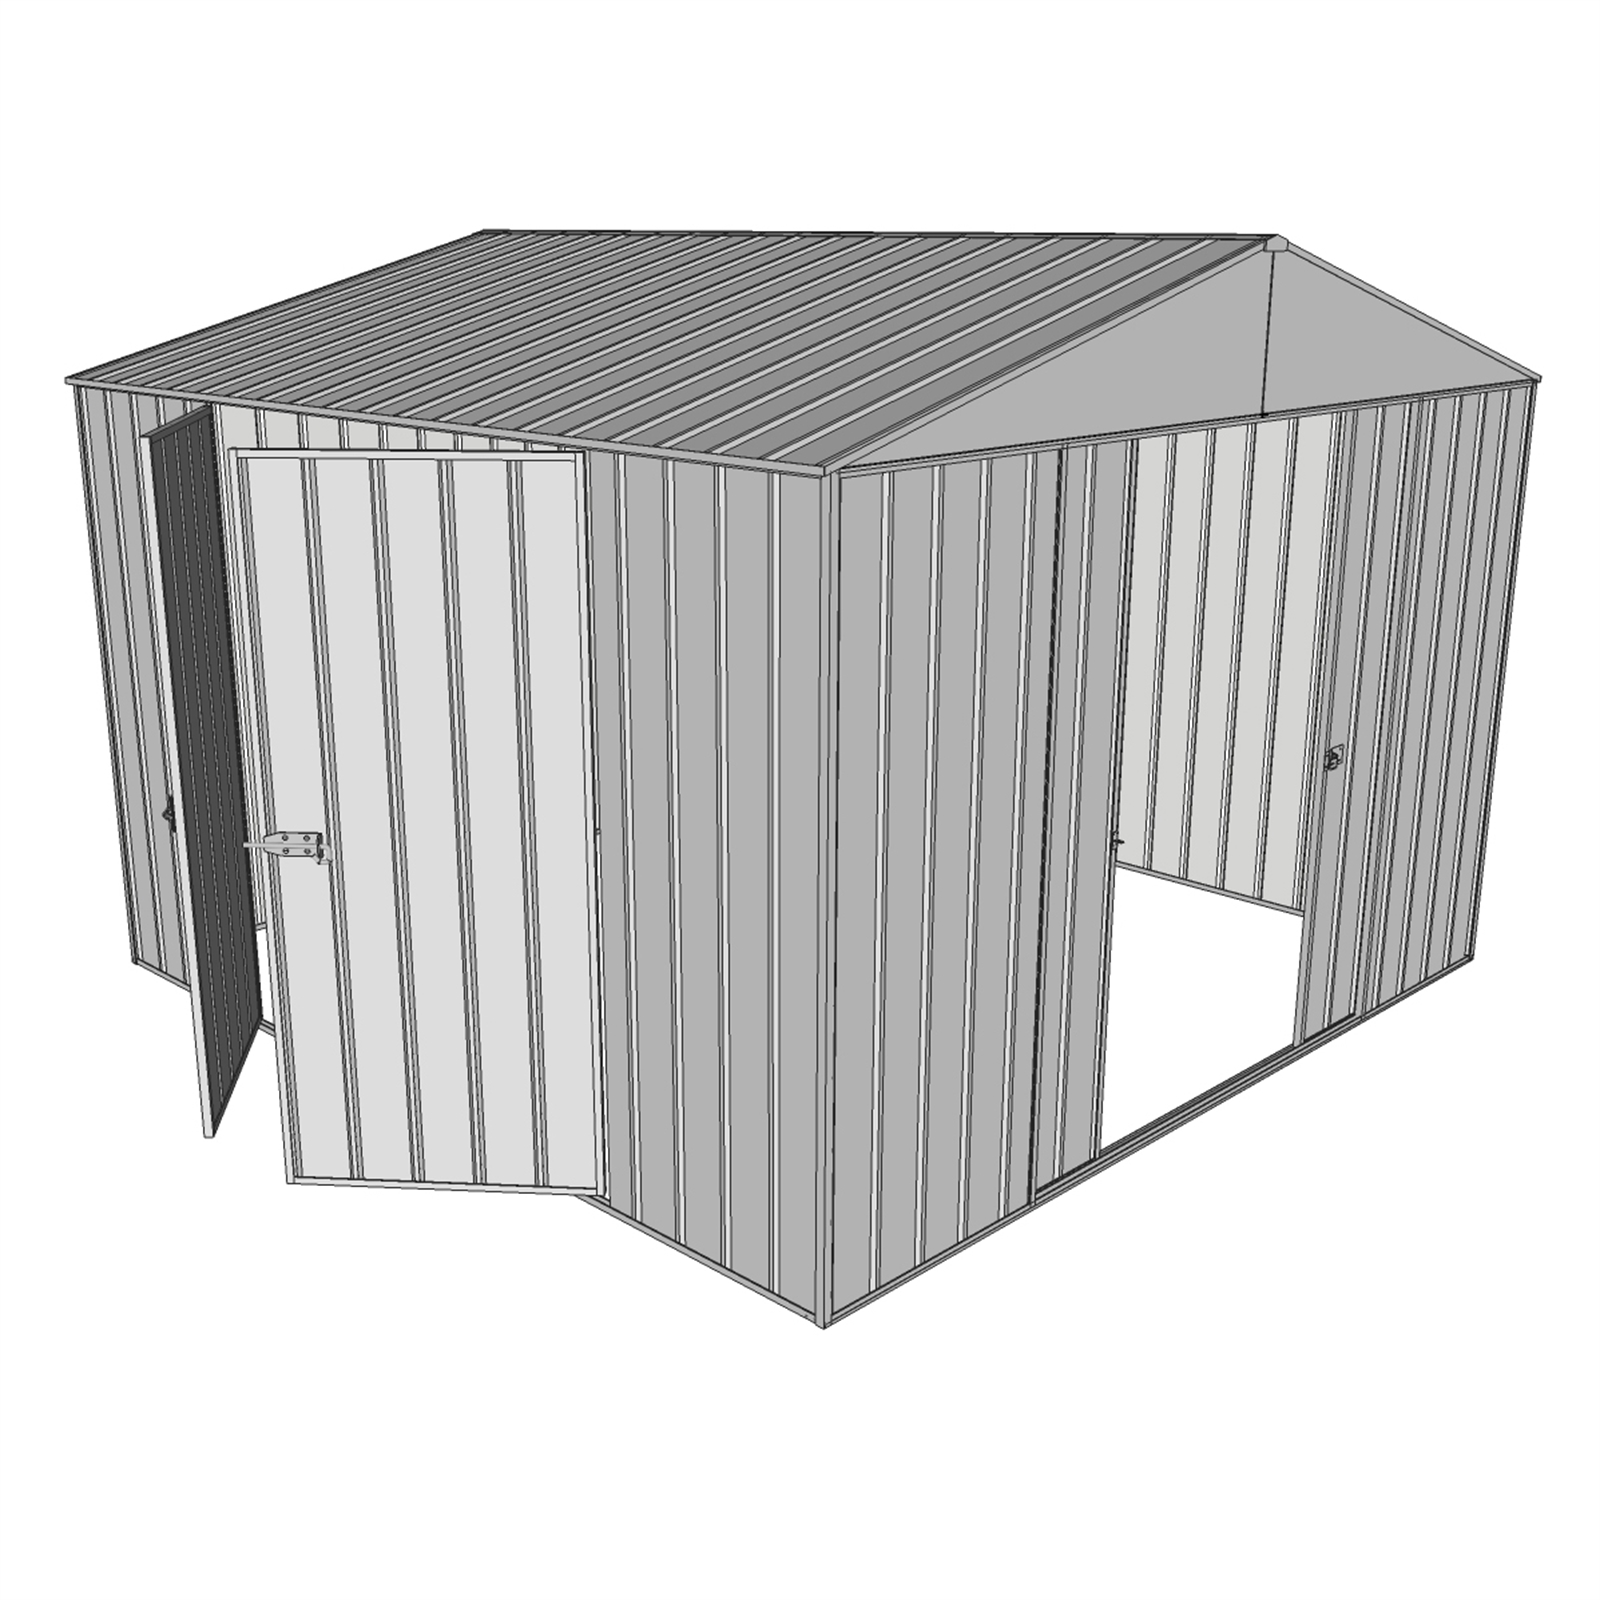 Build-a-Shed 3.0 x 2.3 x 3.0m Zinc Double Sliding and Double Hinge Door Shed